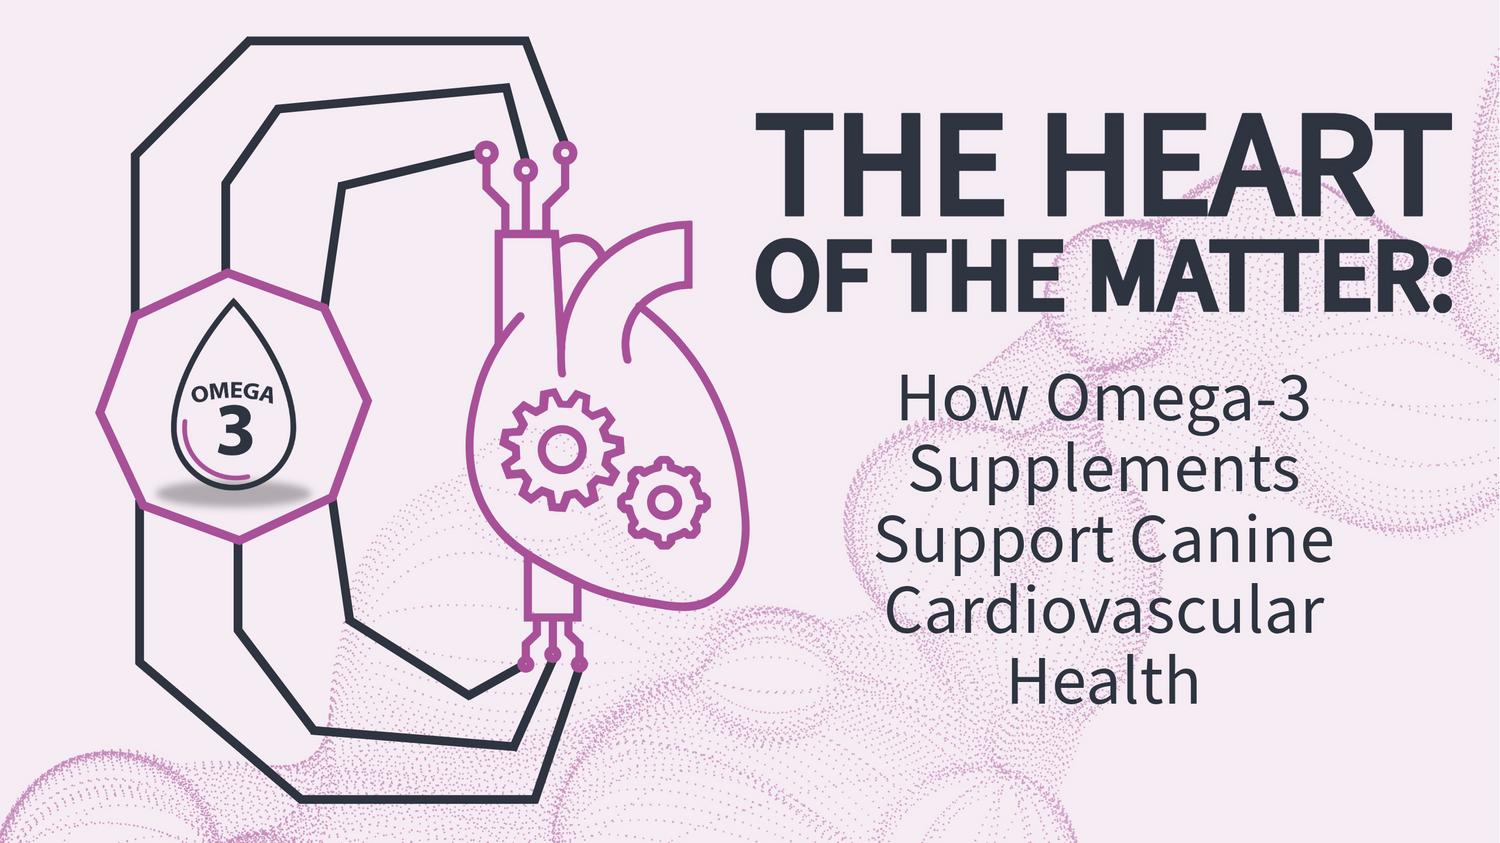 Icon of a anatomic heart connected to an omega 3 oil droplet and the text “The Heart of the Matter”